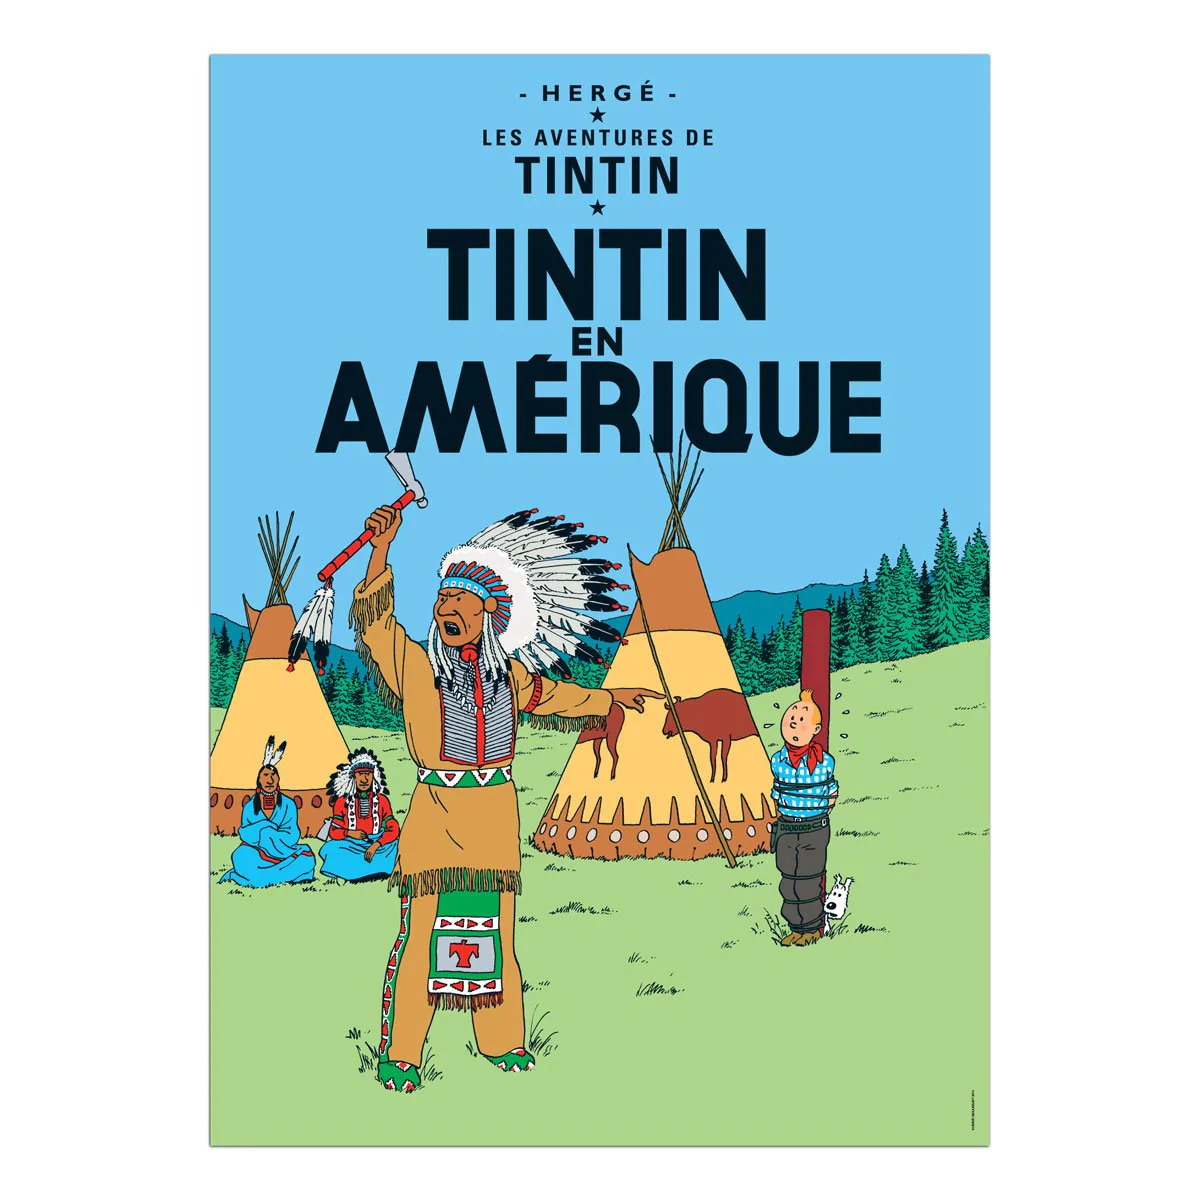 Tintin Posters - Tintin in America - Tintin - Brand_Tintin - Collectibles - Home_Decor - Home_French Nostalgia - Tintin - posters-fr-2015-3_1200_1301-22020_tintininamericaposter